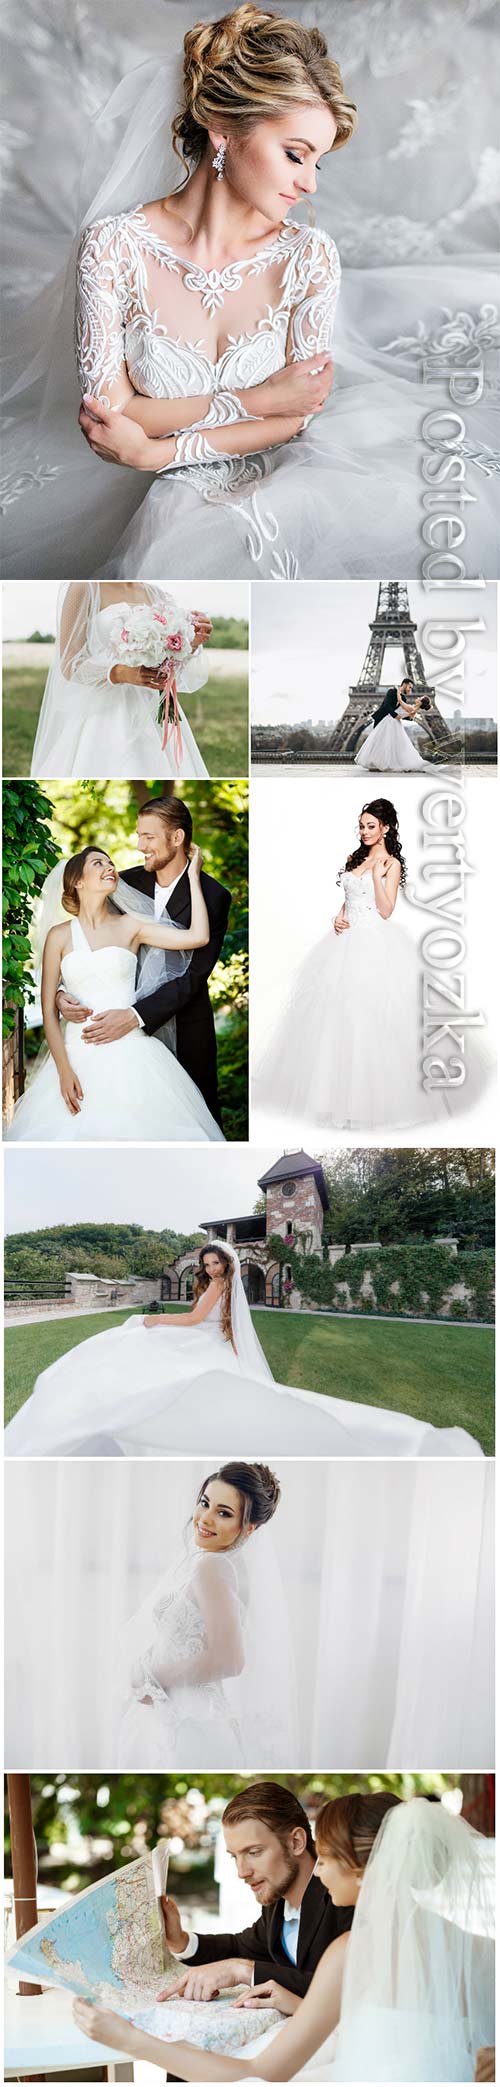 Brides in luxurious dresses and handsome men stock photo